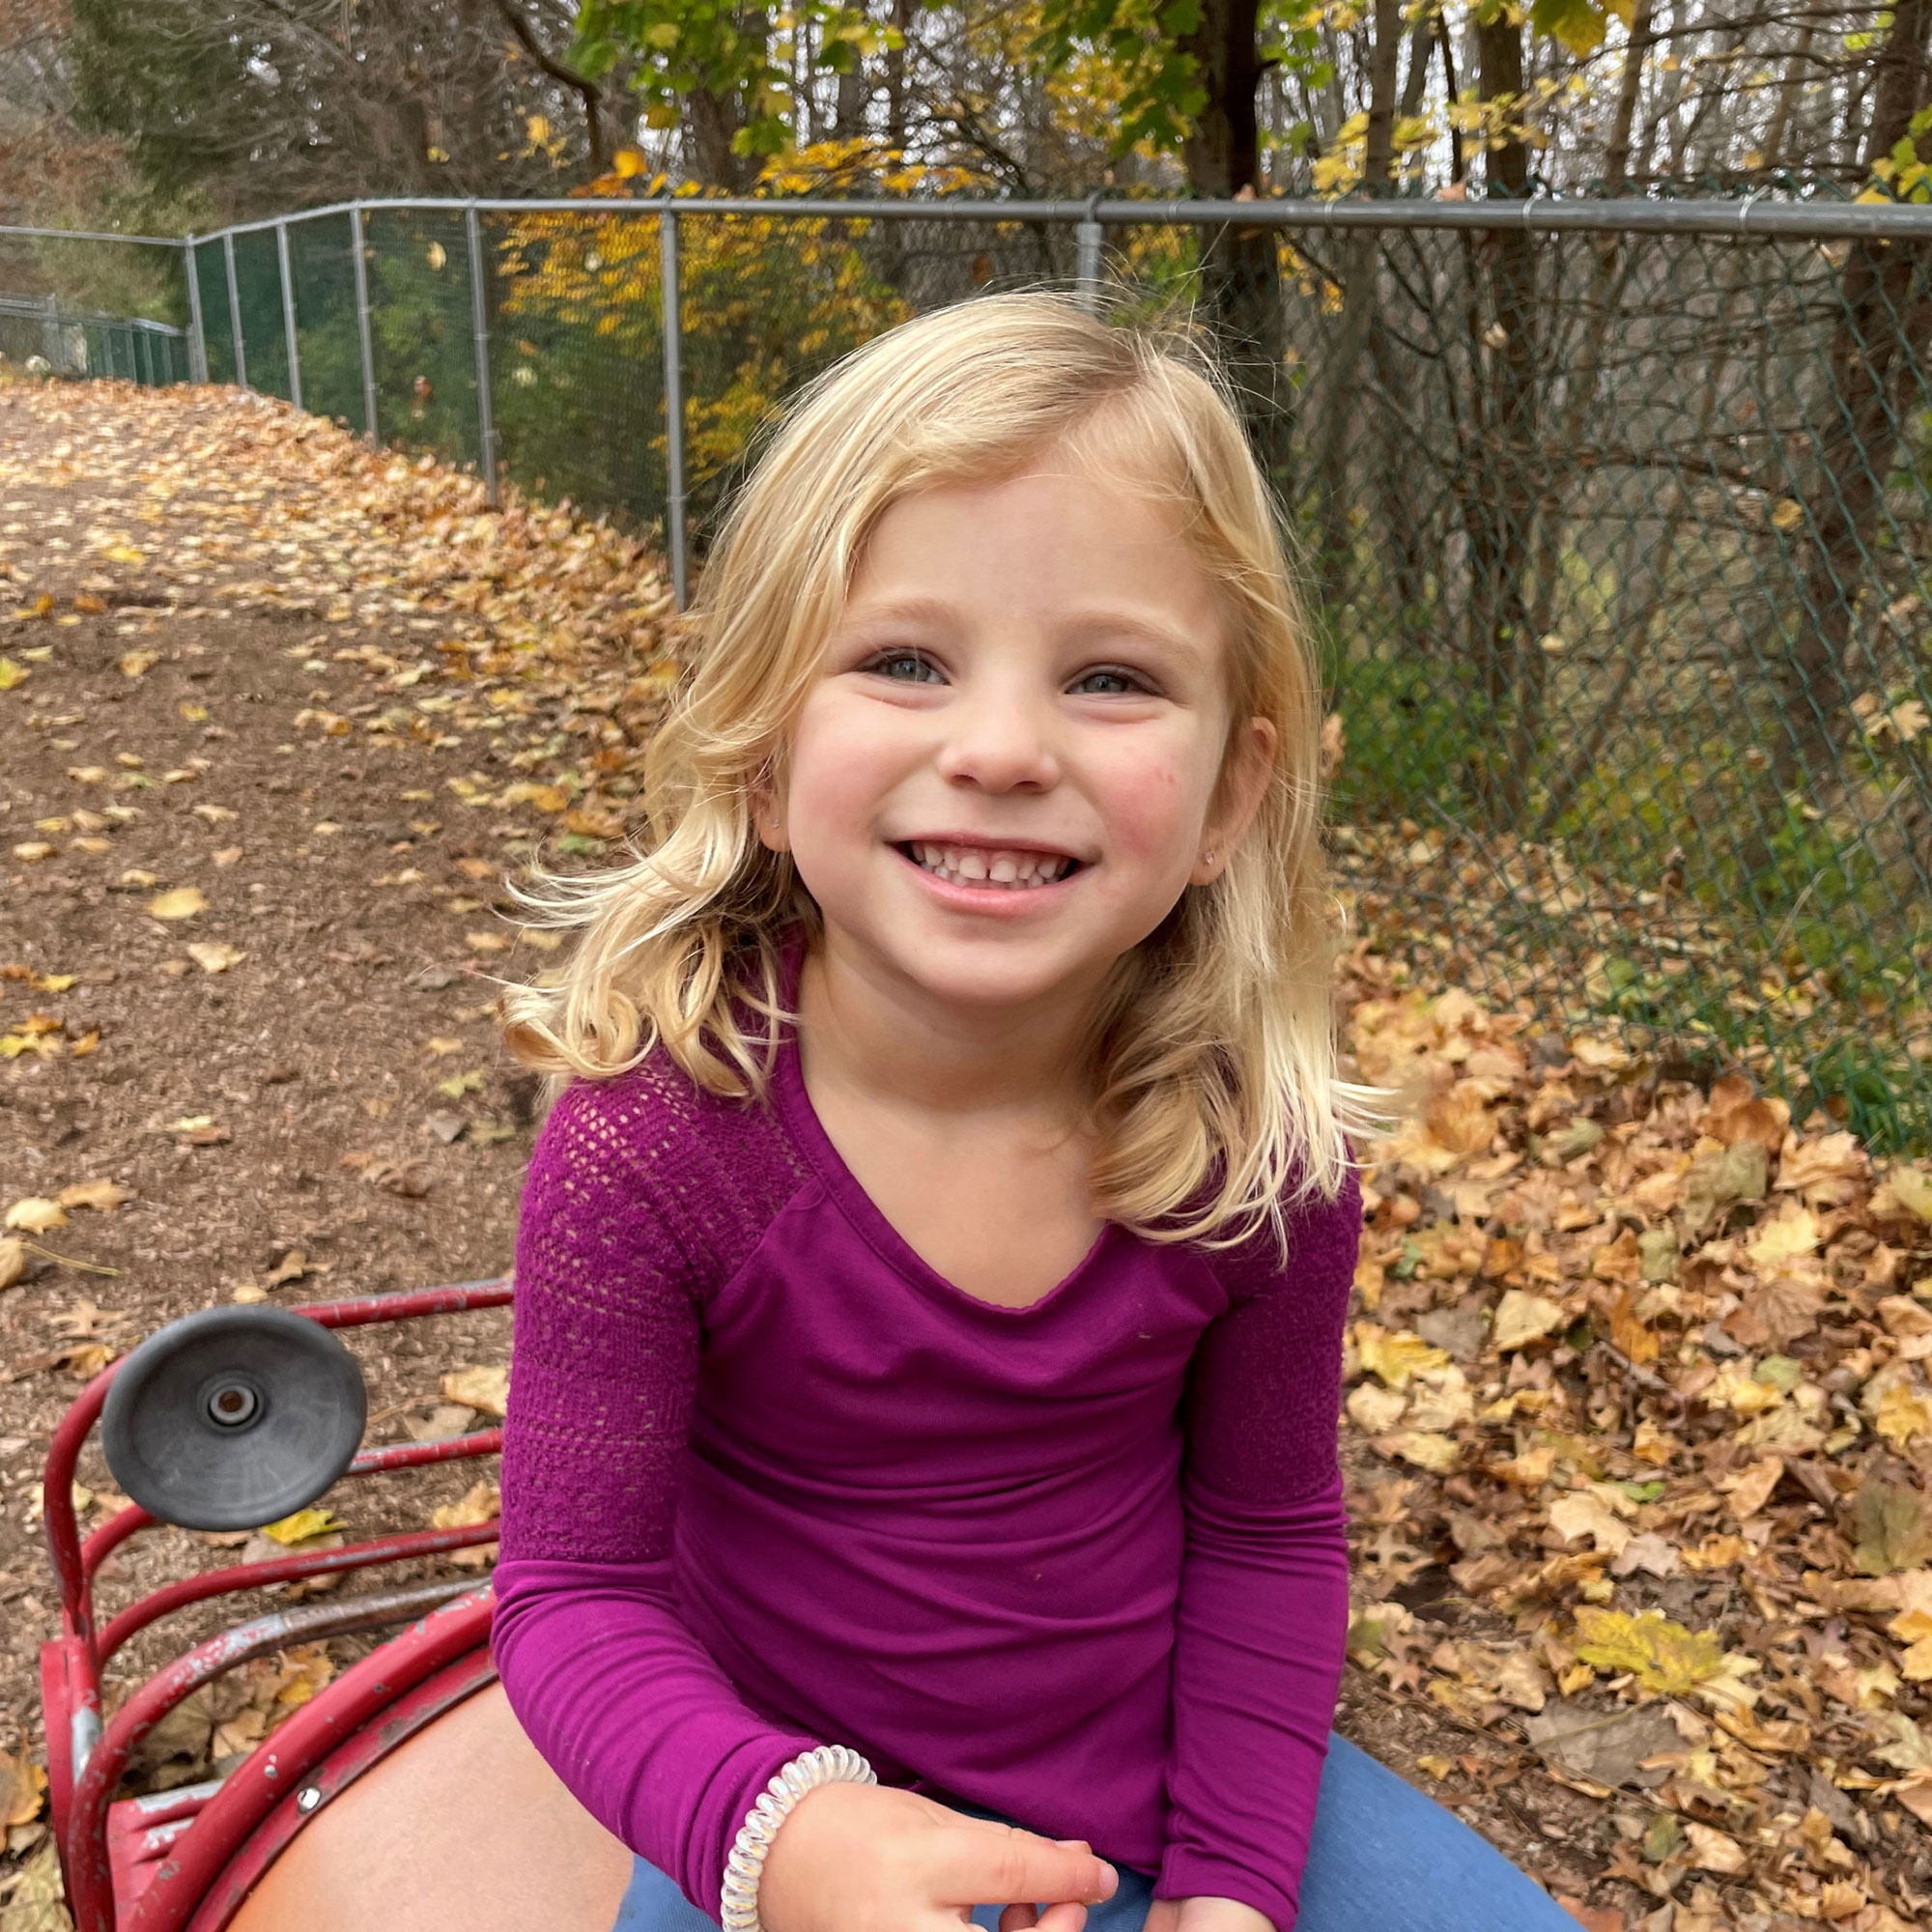 A young girl sits at the playground and smiles for the camera.